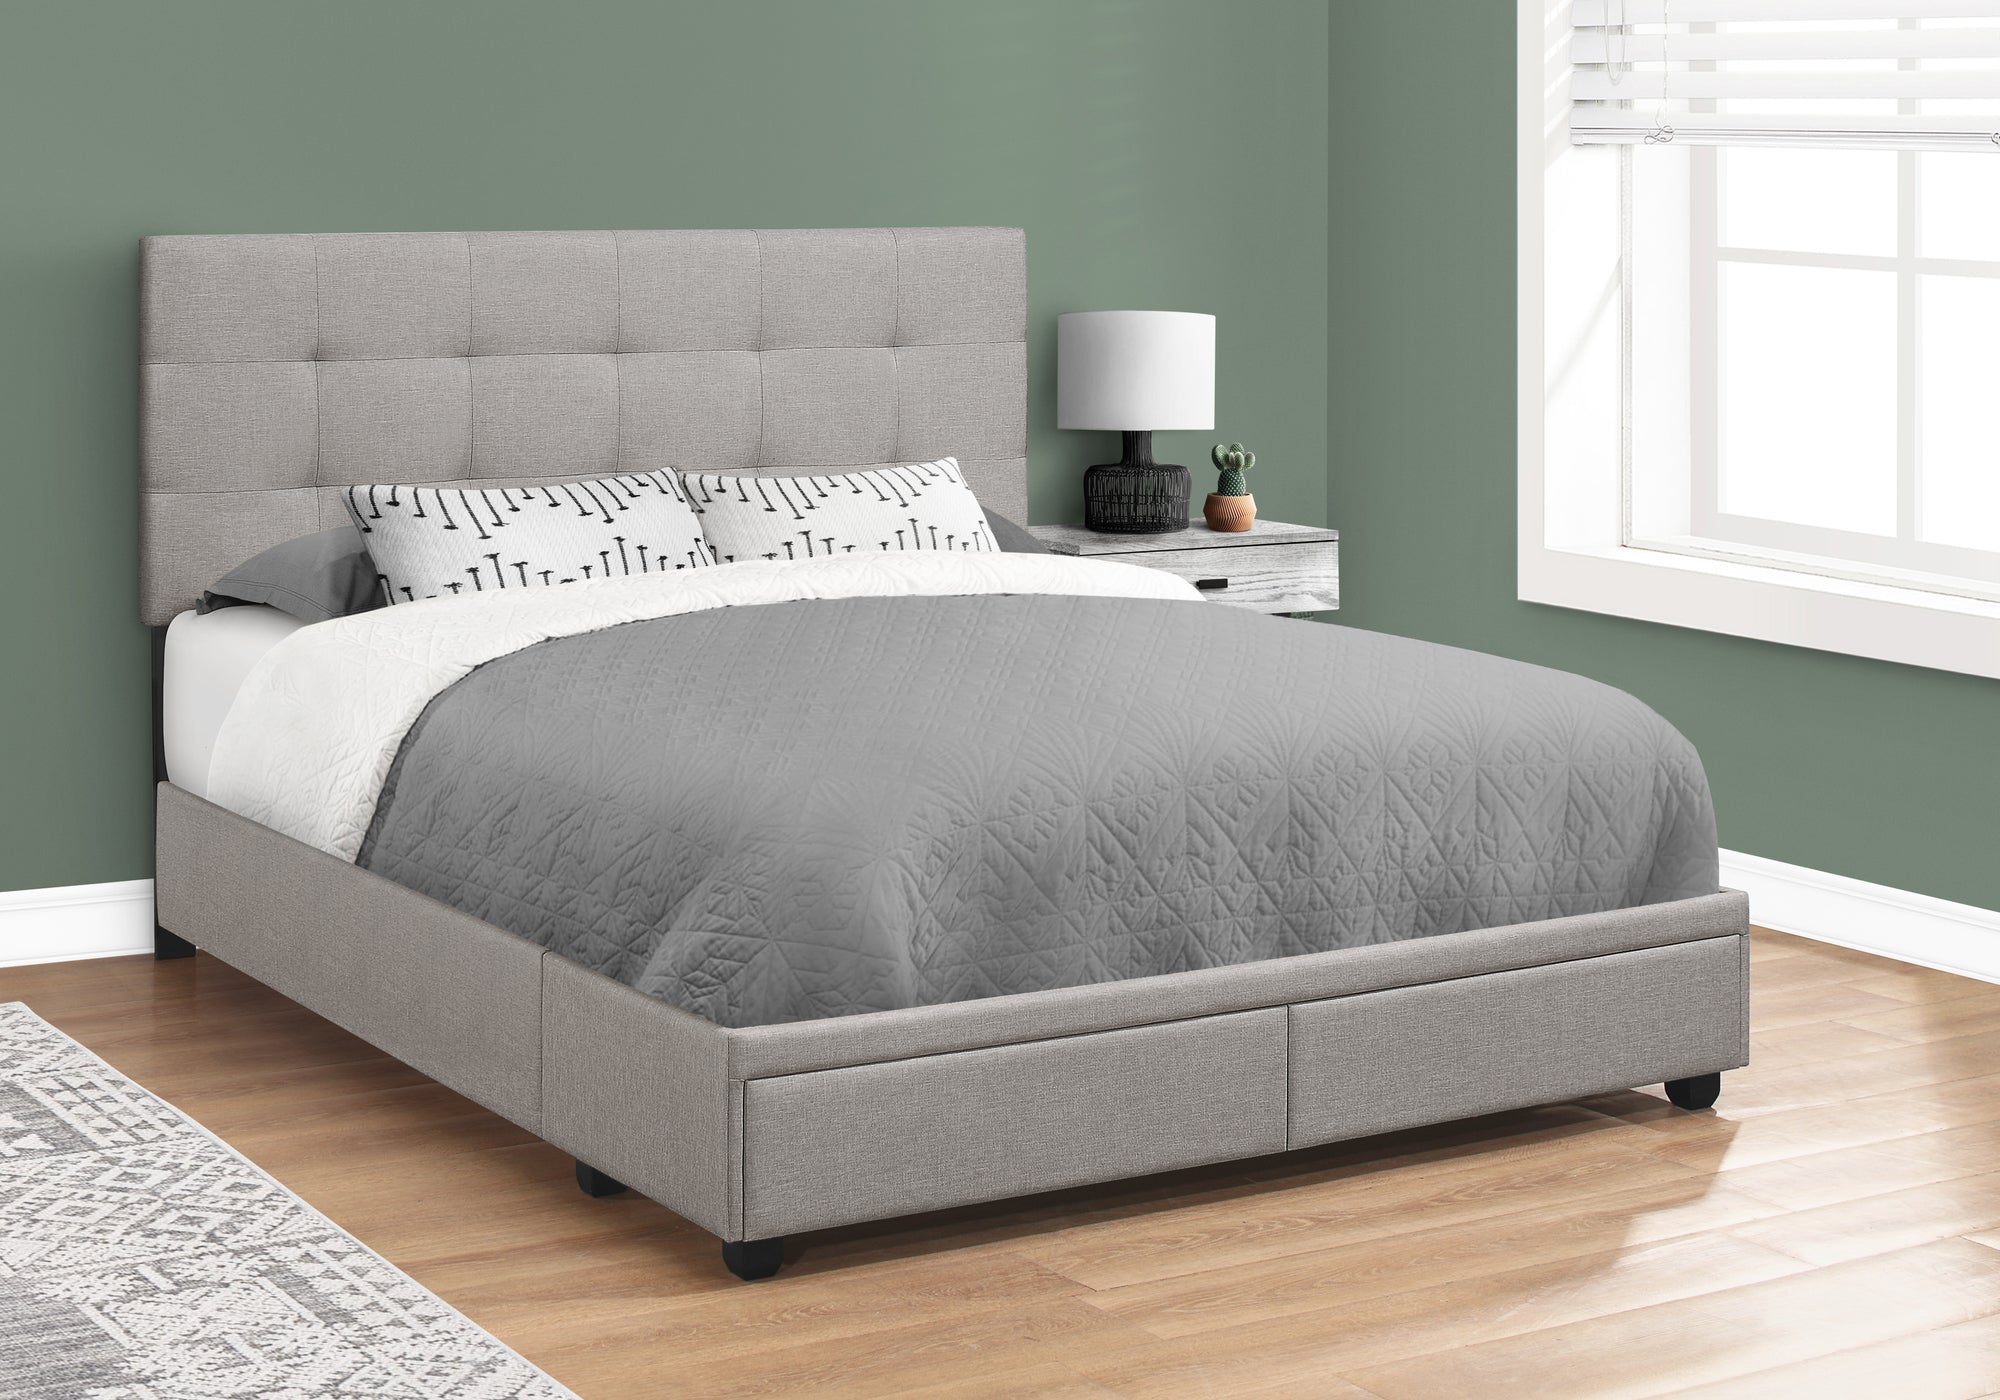 MN-596020Q    Bed, Frame, Platform, Bedroom, Queen Size, Upholstered, Linen Look Fabric, Wood Legs, Grey, Black, Contemporary, Modern